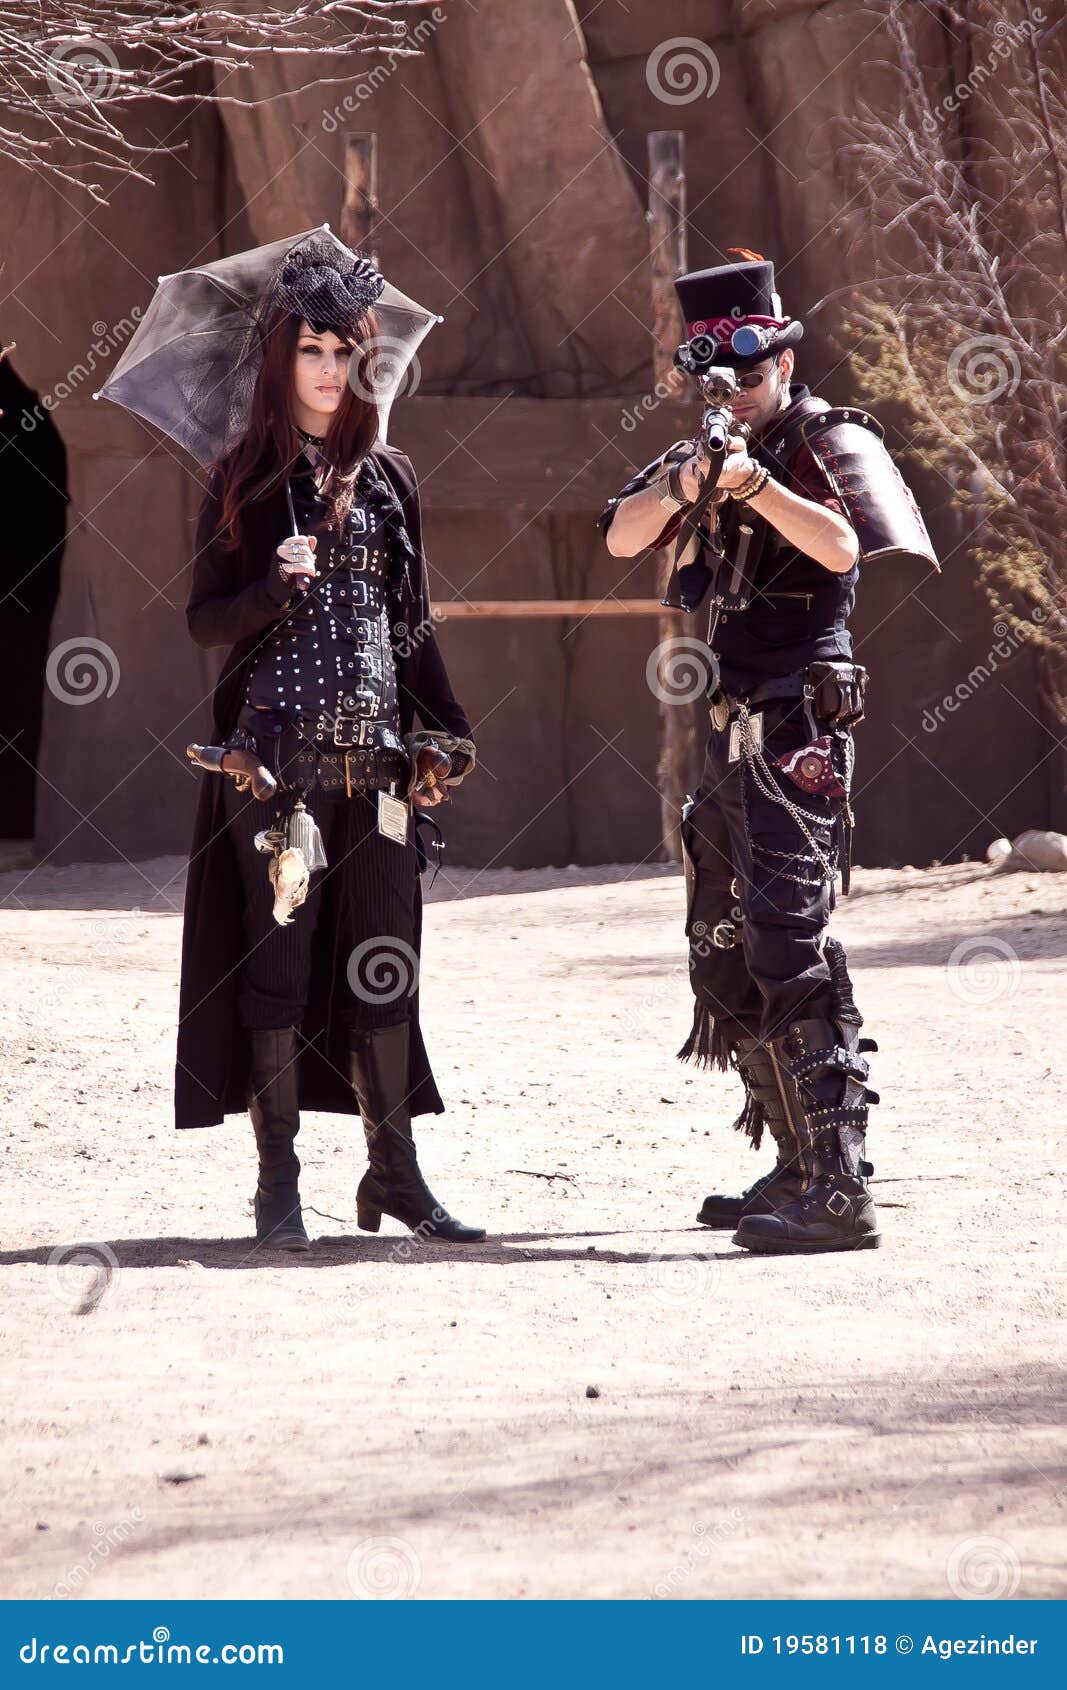 Steampunk editorial stock photo. Image of cosplayer ...